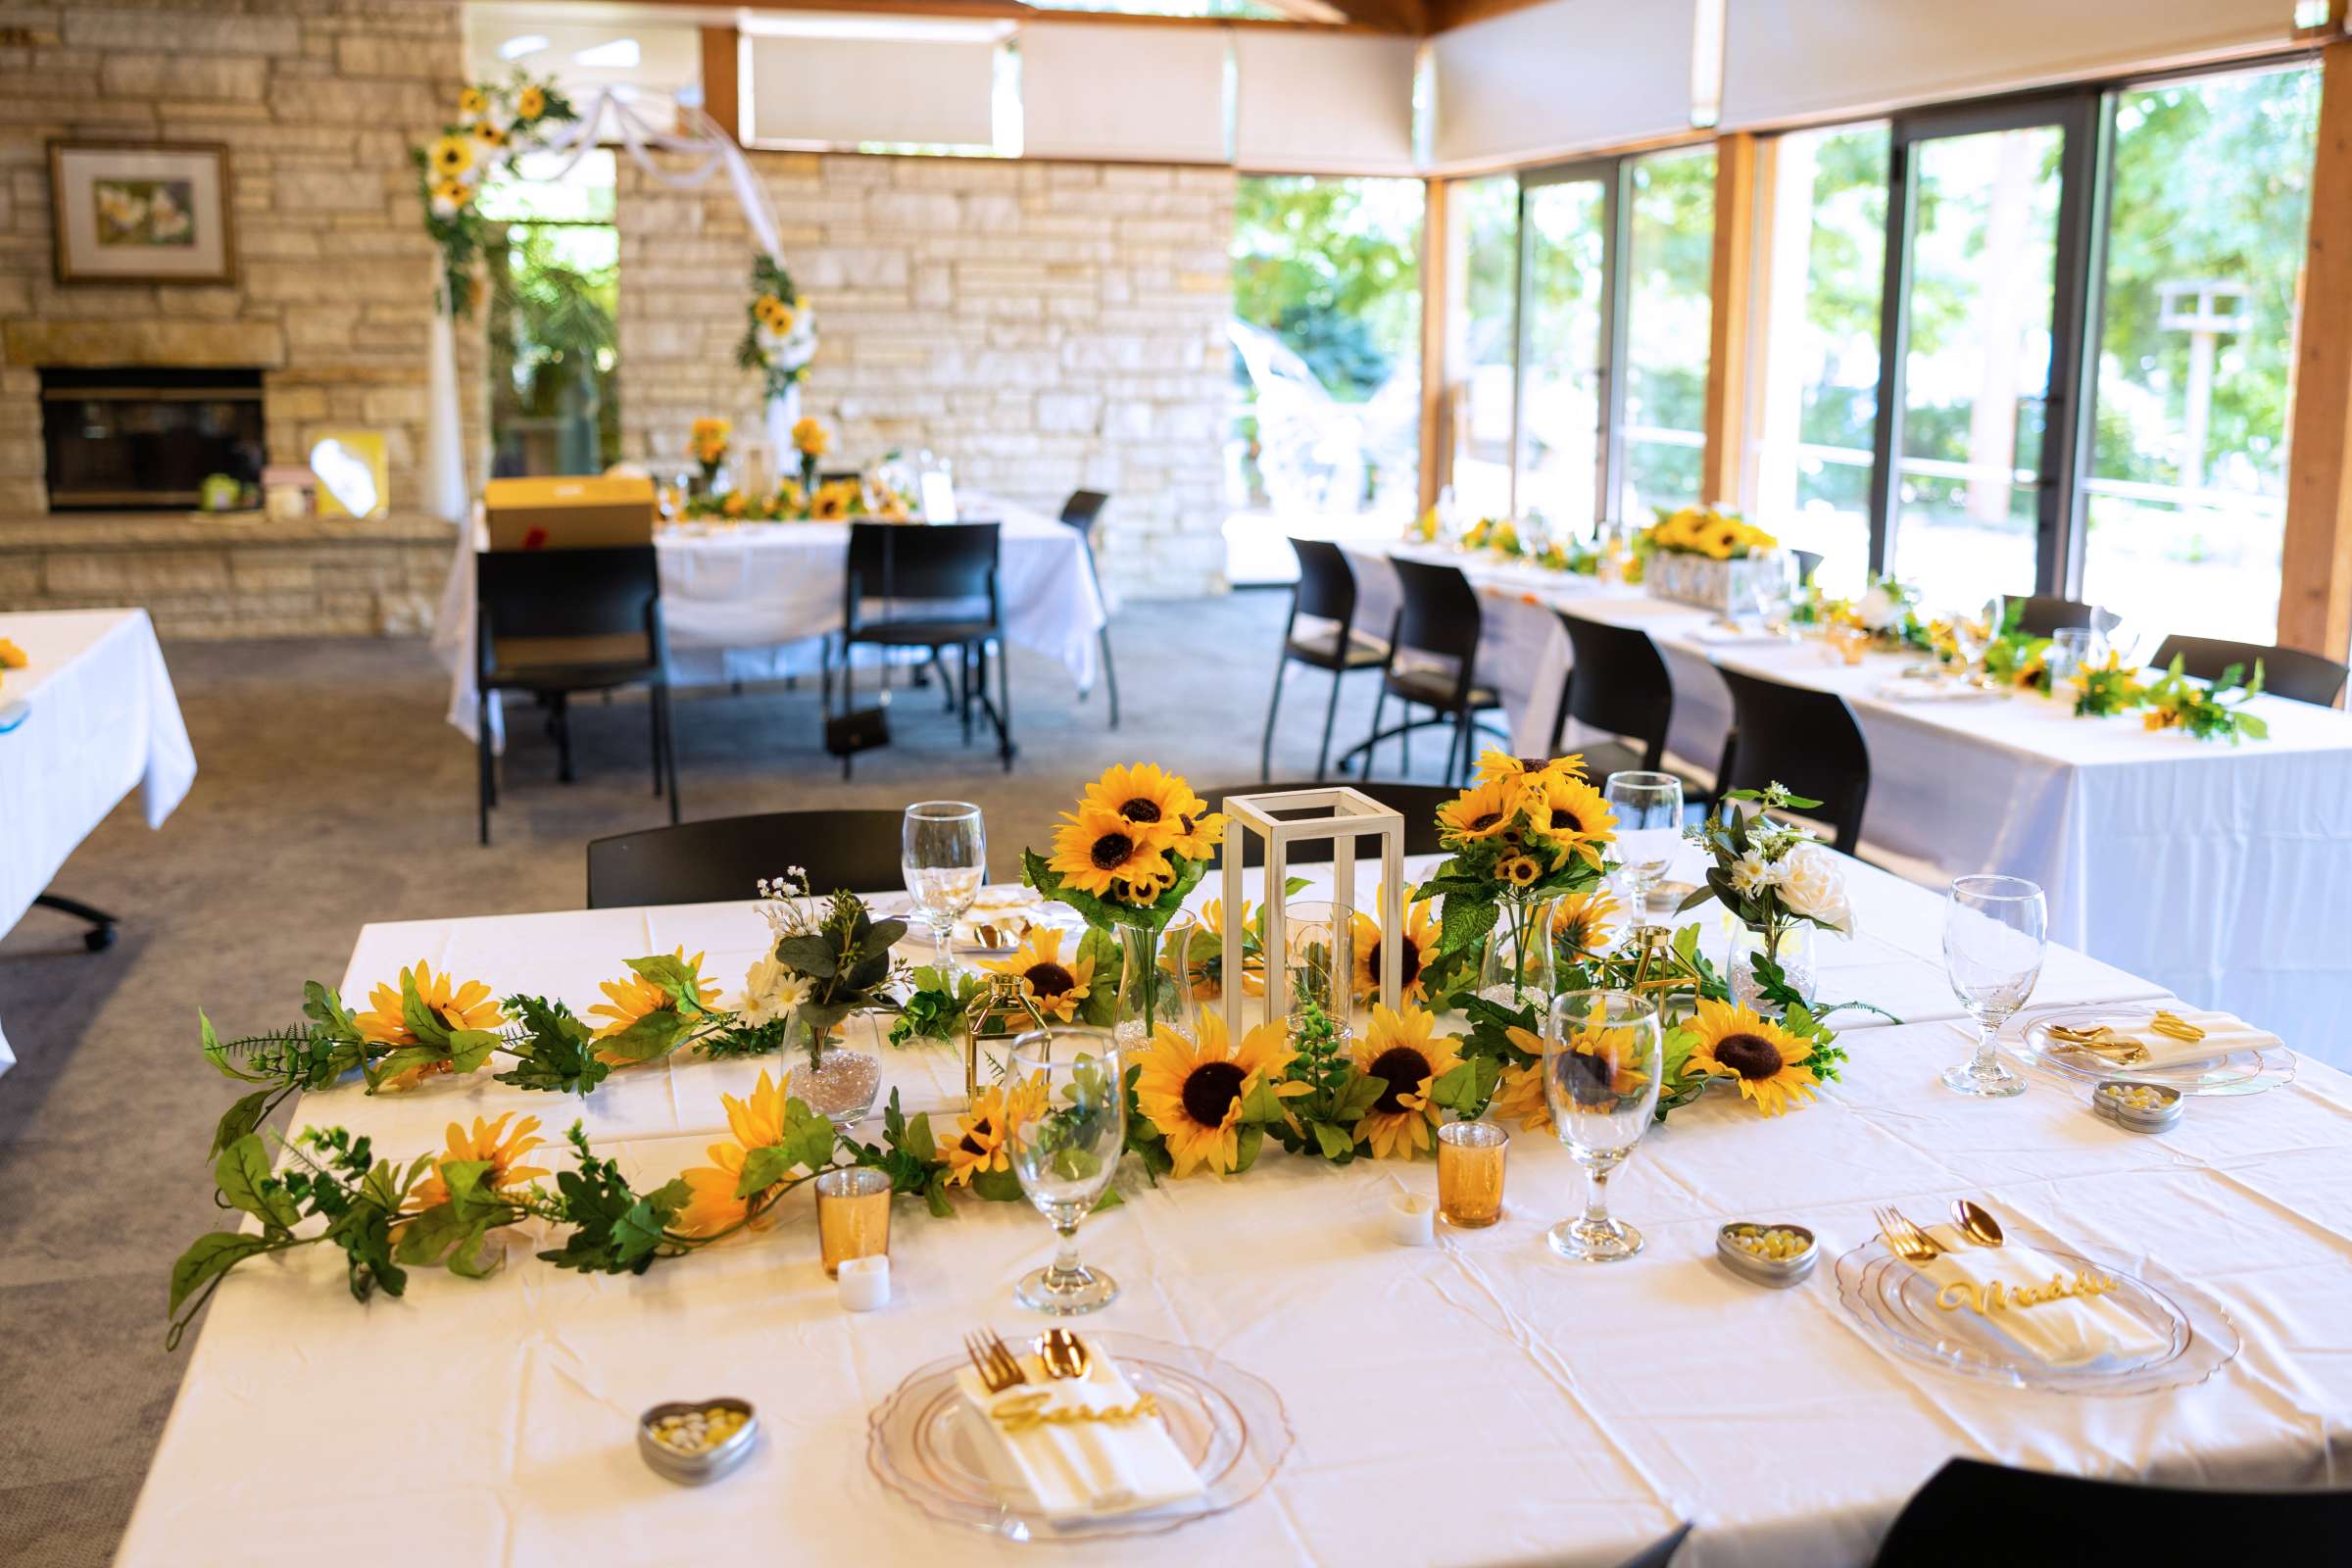 Room set for wedding reception with sunflowers on tables